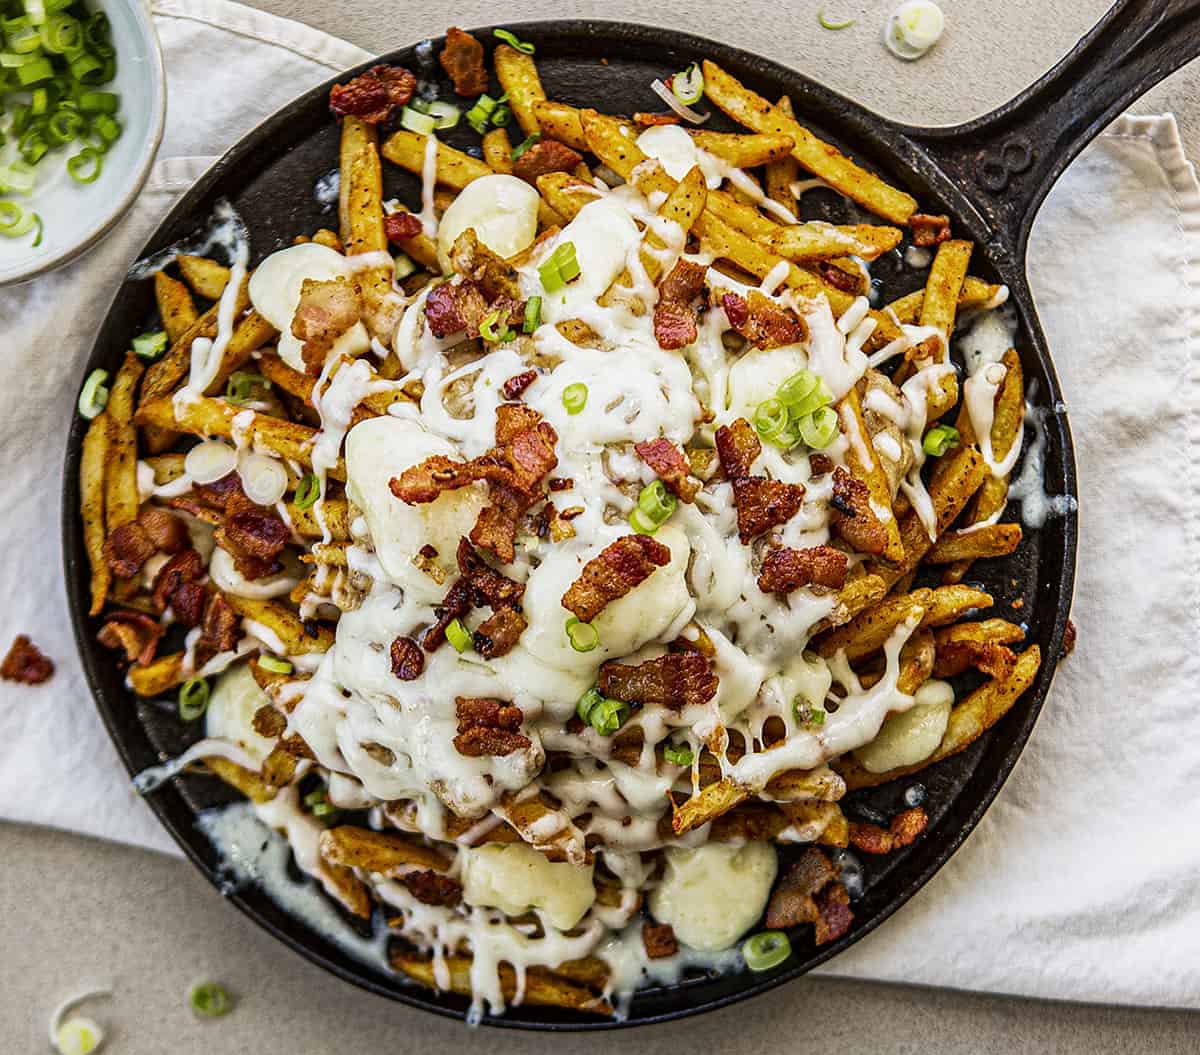 Overhead Image of Poutine with Bacon and Scallions in Bowl in Back